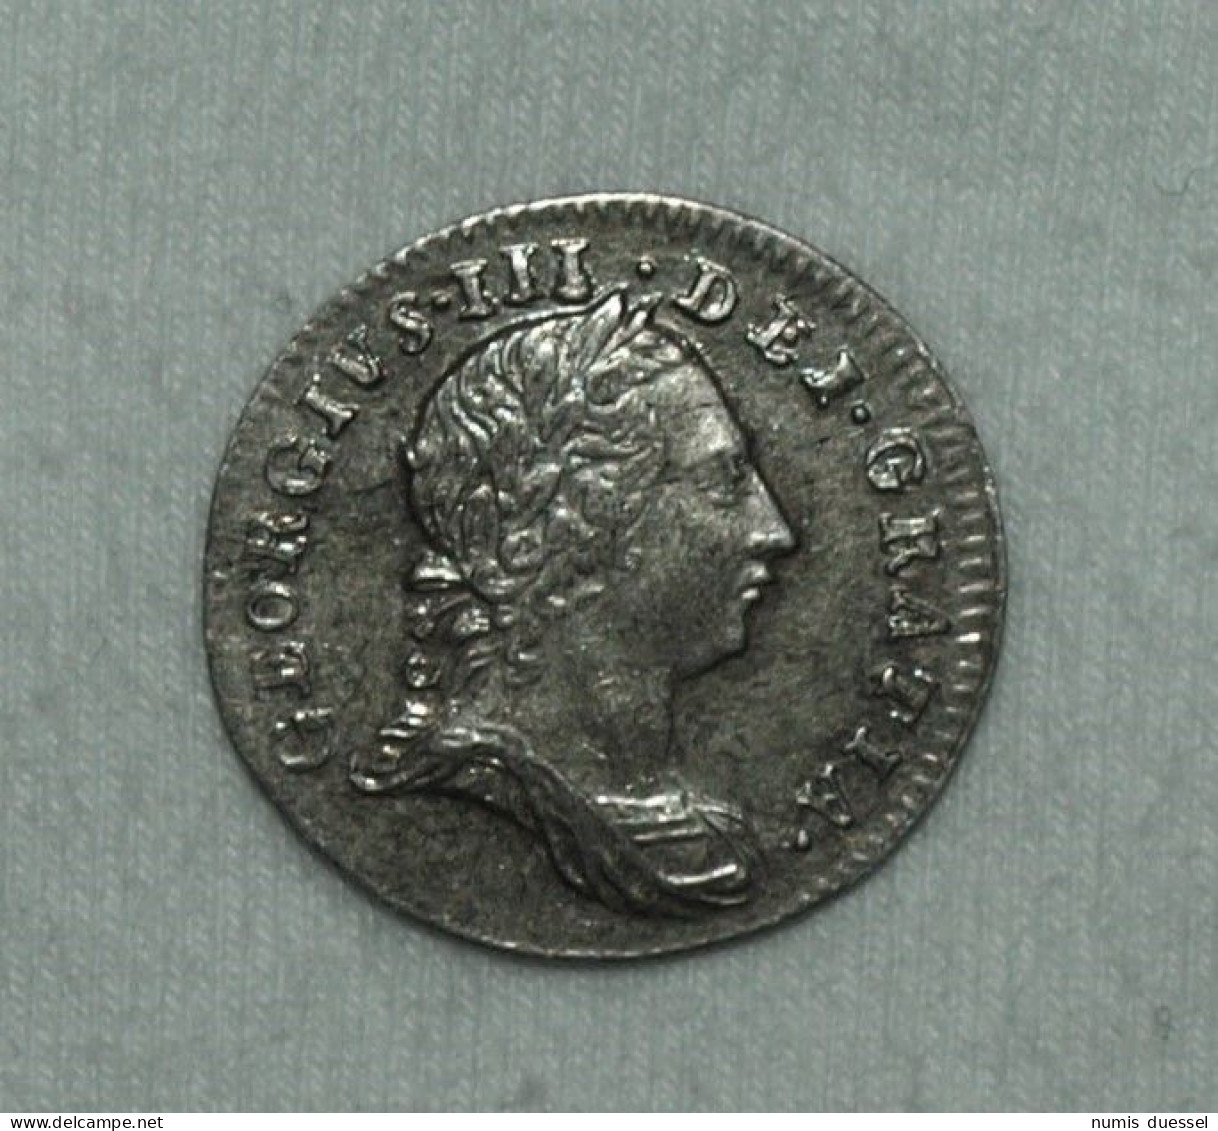 Silber/Silver Prooflike Maundy Großbritannien/Great Britain George III, 1762, 3 Pence VZ+/XF+ - Maundy Sets  & Conmemorativas